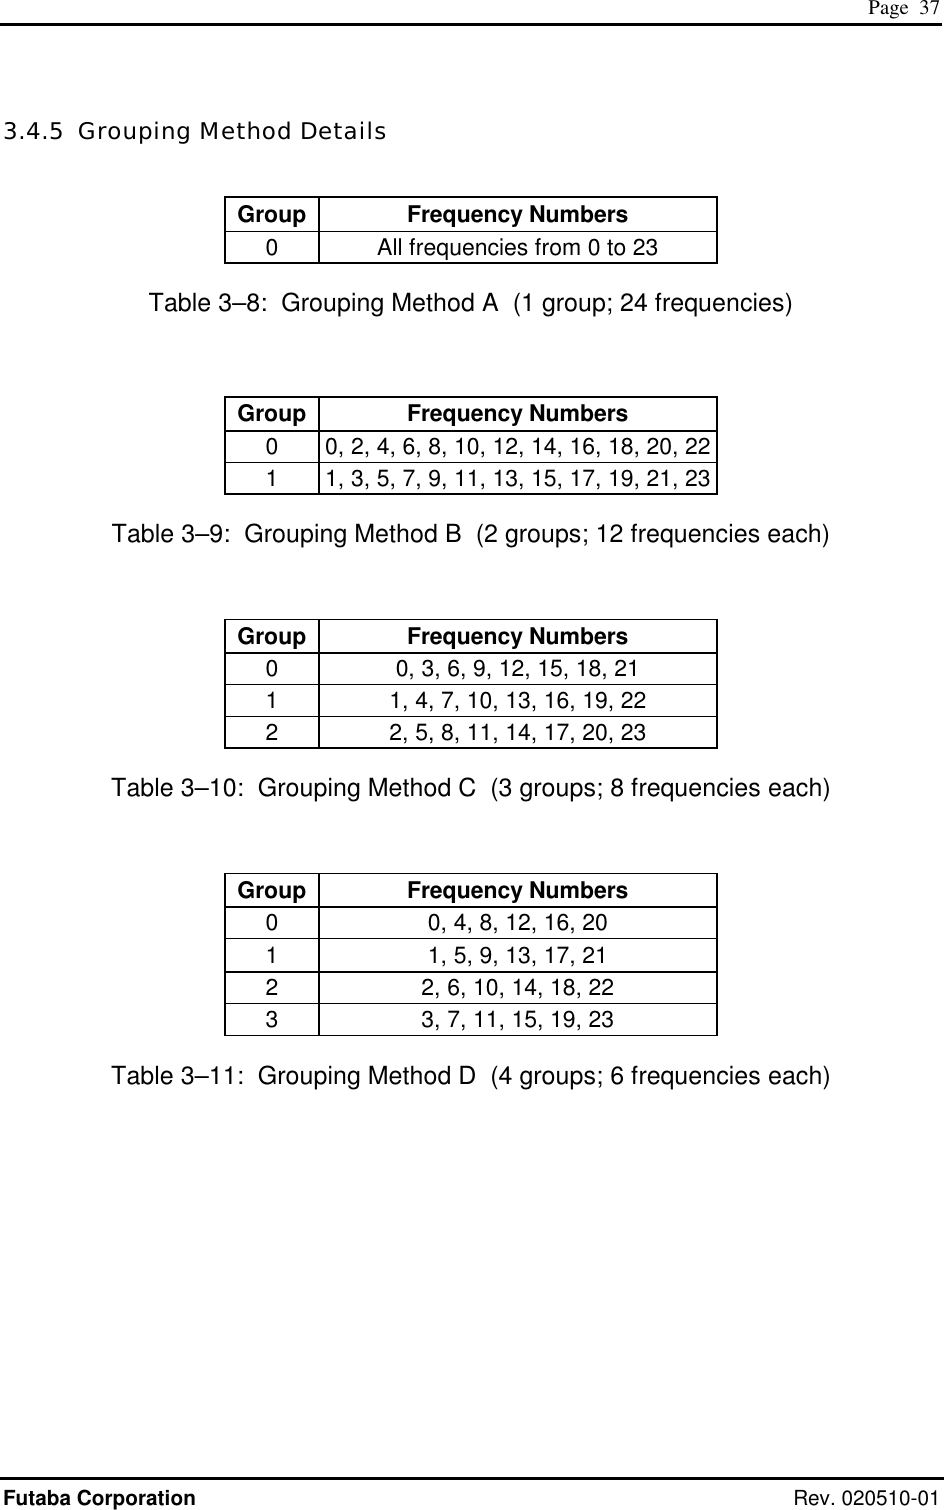  Page  37 Futaba Corporation Rev. 020510-01 3.4.5  Grouping Method Details  Group Frequency Numbers 0  All frequencies from 0 to 23 Table 3–8:  Grouping Method A  (1 group; 24 frequencies)  Group Frequency Numbers 0  0, 2, 4, 6, 8, 10, 12, 14, 16, 18, 20, 22 1  1, 3, 5, 7, 9, 11, 13, 15, 17, 19, 21, 23 Table 3–9:  Grouping Method B  (2 groups; 12 frequencies each)  Group Frequency Numbers 0  0, 3, 6, 9, 12, 15, 18, 21 1  1, 4, 7, 10, 13, 16, 19, 22 2  2, 5, 8, 11, 14, 17, 20, 23 Table 3–10:  Grouping Method C  (3 groups; 8 frequencies each)  Group Frequency Numbers 0  0, 4, 8, 12, 16, 20 1  1, 5, 9, 13, 17, 21 2  2, 6, 10, 14, 18, 22 3  3, 7, 11, 15, 19, 23 Table 3–11:  Grouping Method D  (4 groups; 6 frequencies each) 